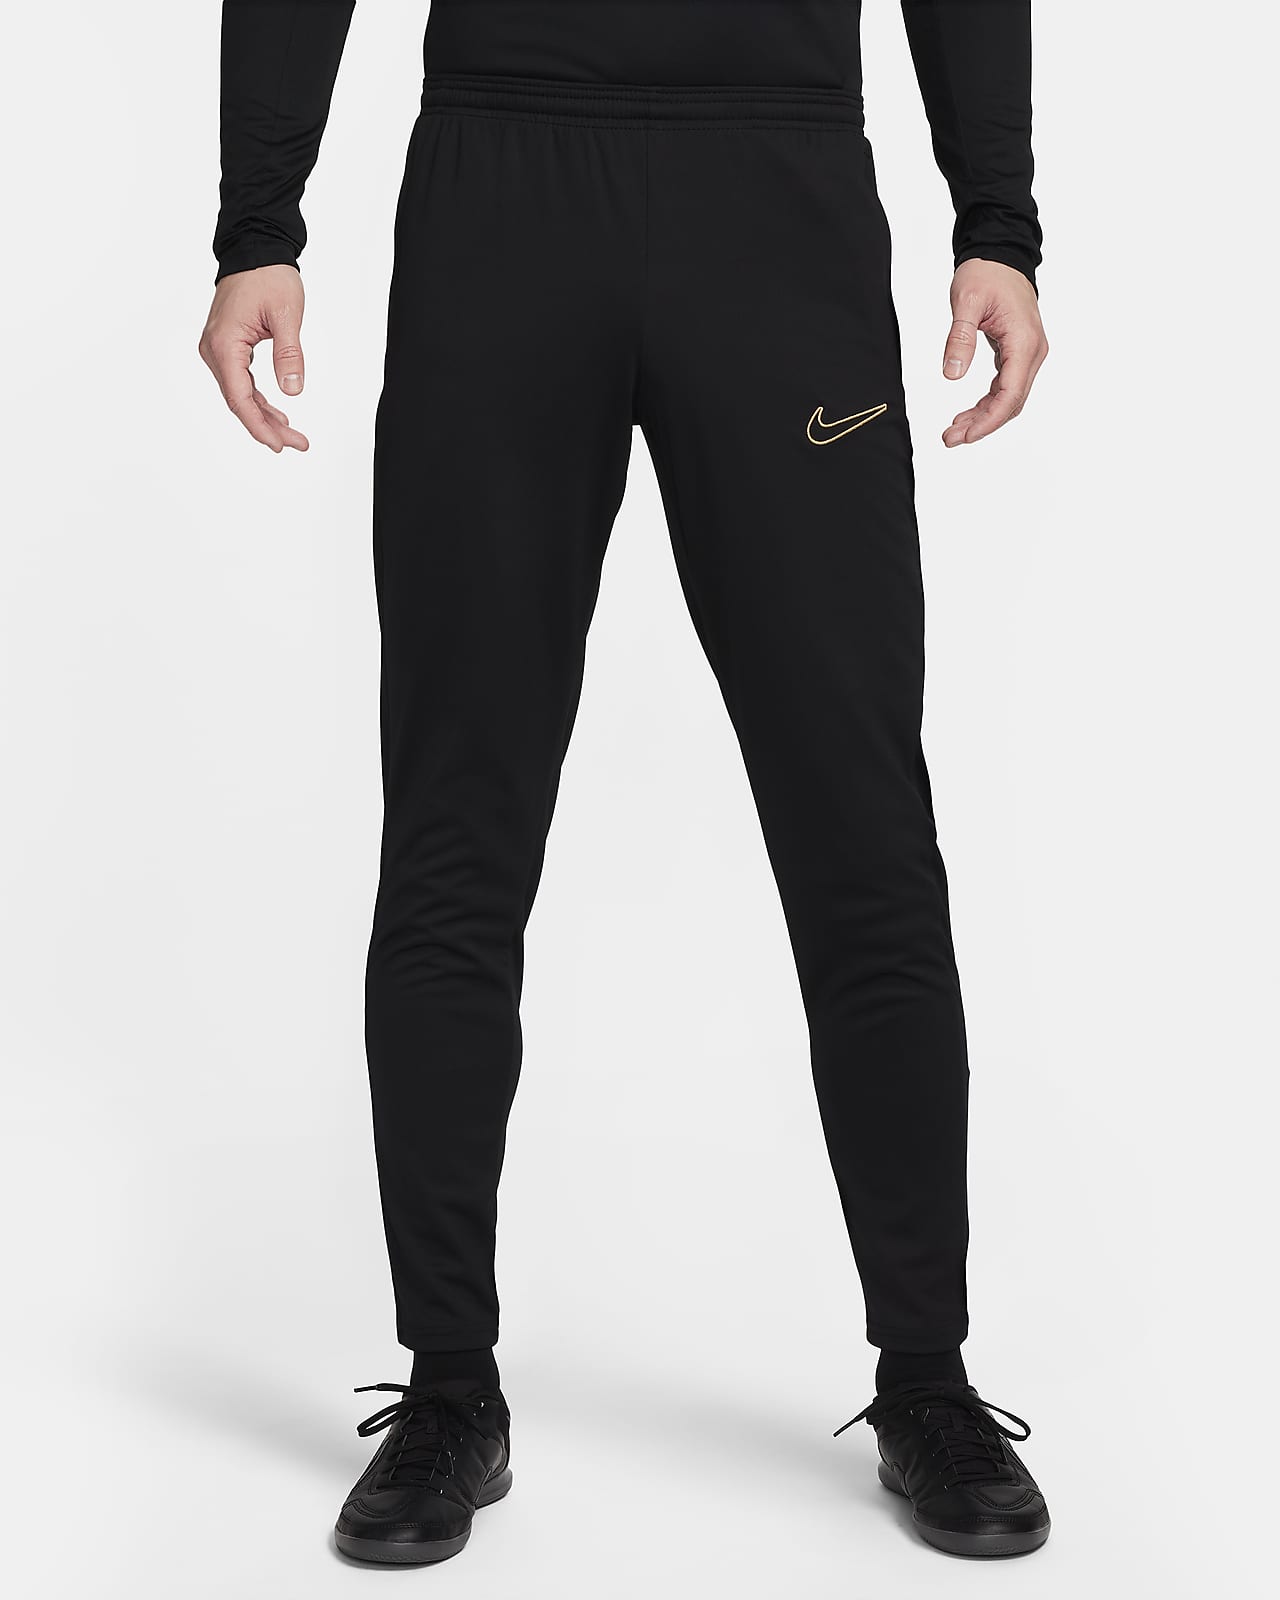 Football Training Trousers for Adults Adidas Condivo Real Madrid 22 Black  Men - buy, price, reviews in Estonia | sellme.ee